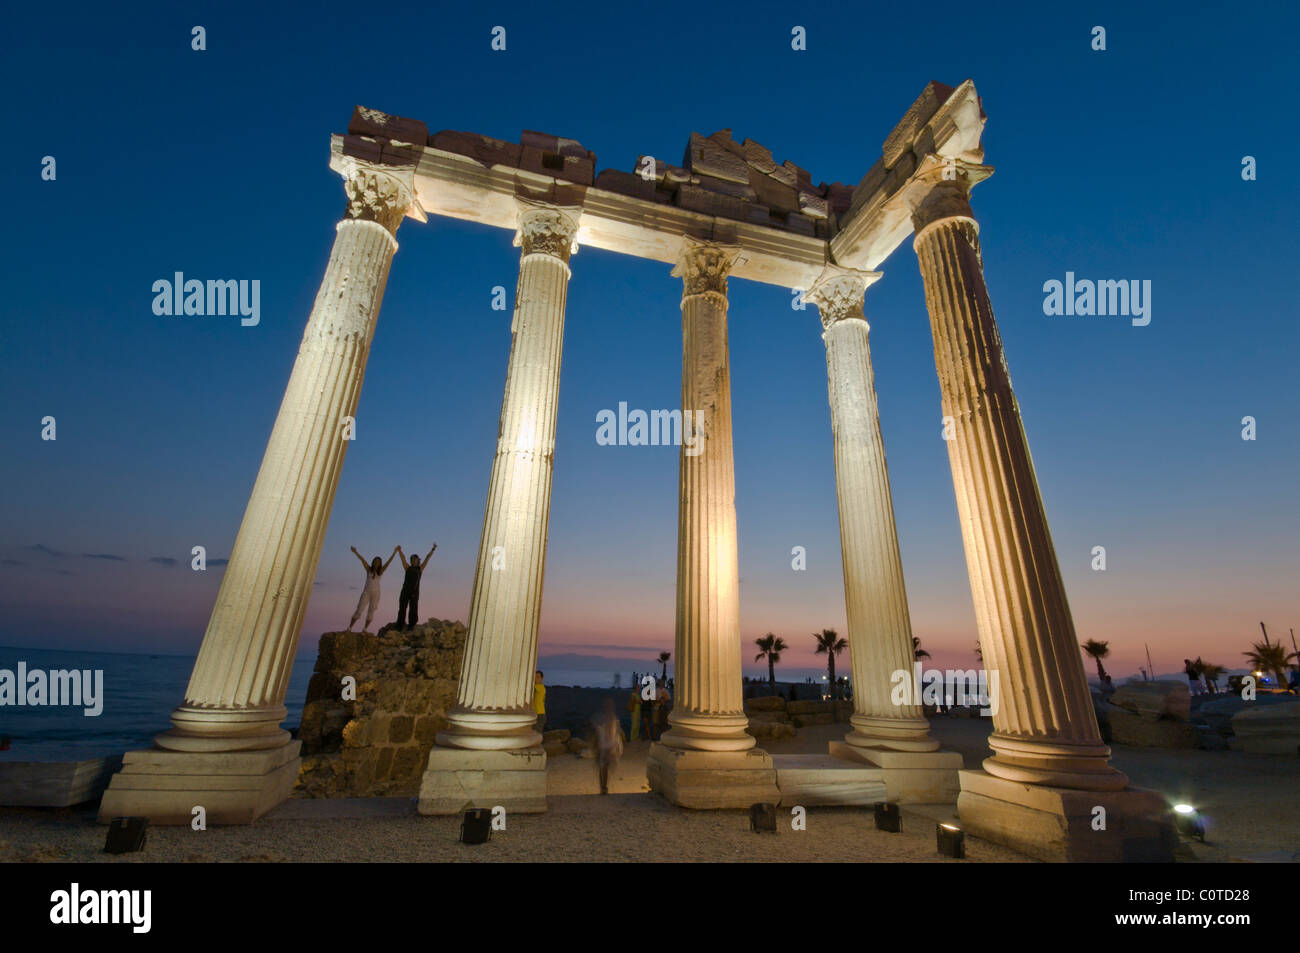 Temple of Apollo in Side,Antalya province, on the southern Mediterranean coast of Turkey Stock Photo